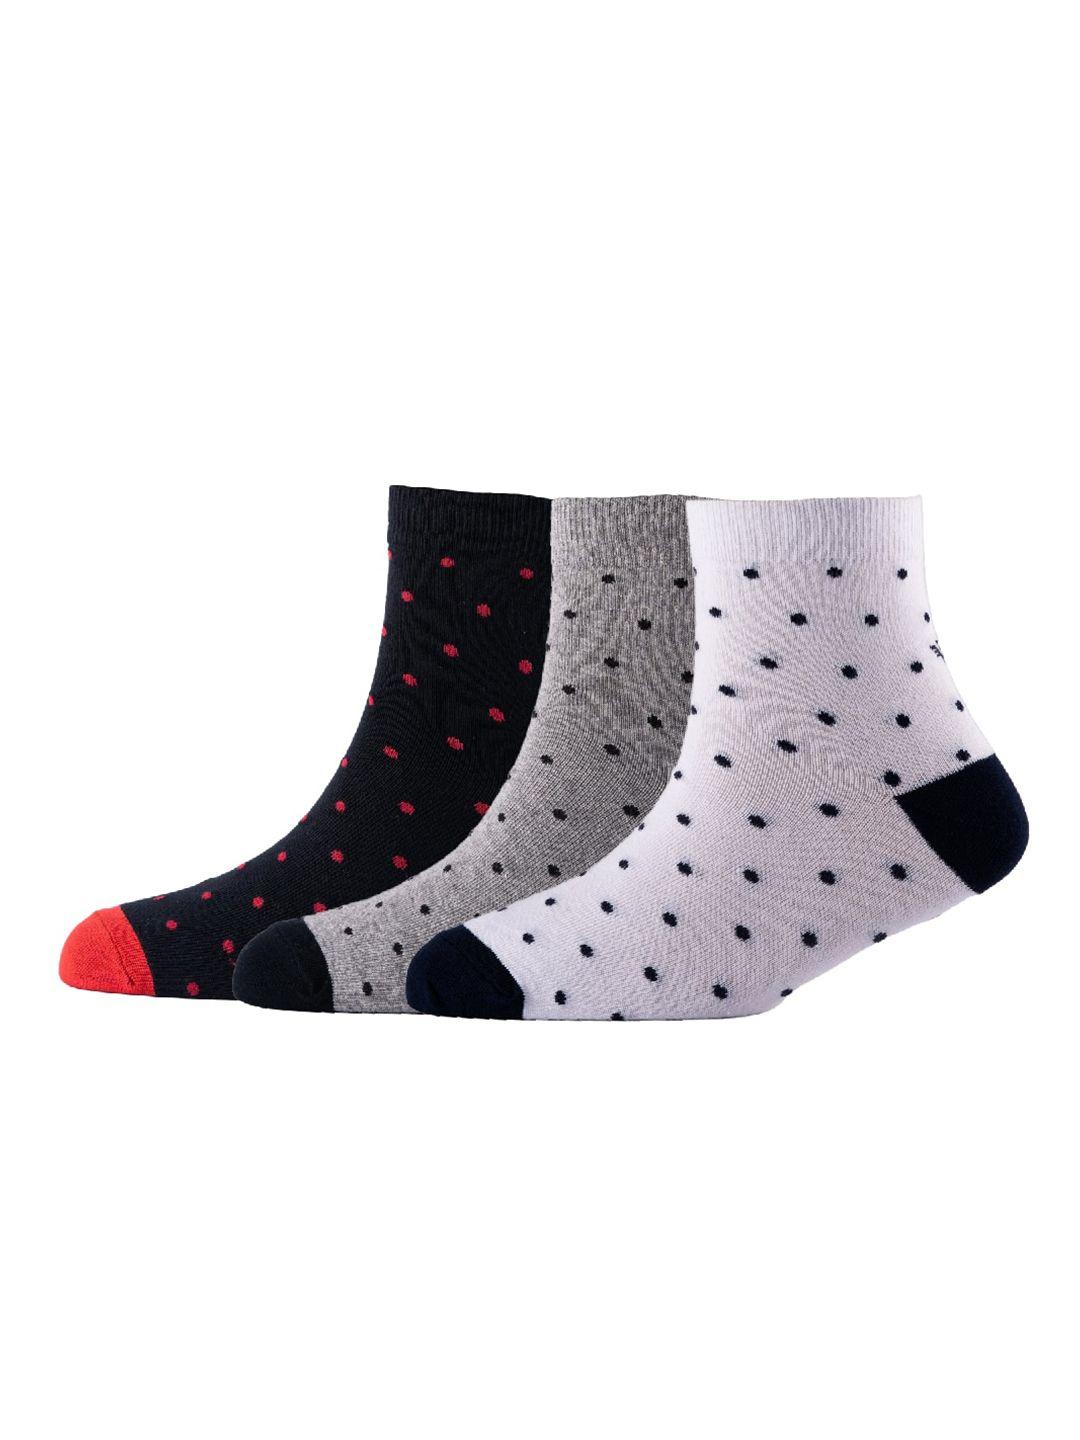 cotstyle-men-pack-of-3-patterned-pure-cotton-above-ankle-length-socks